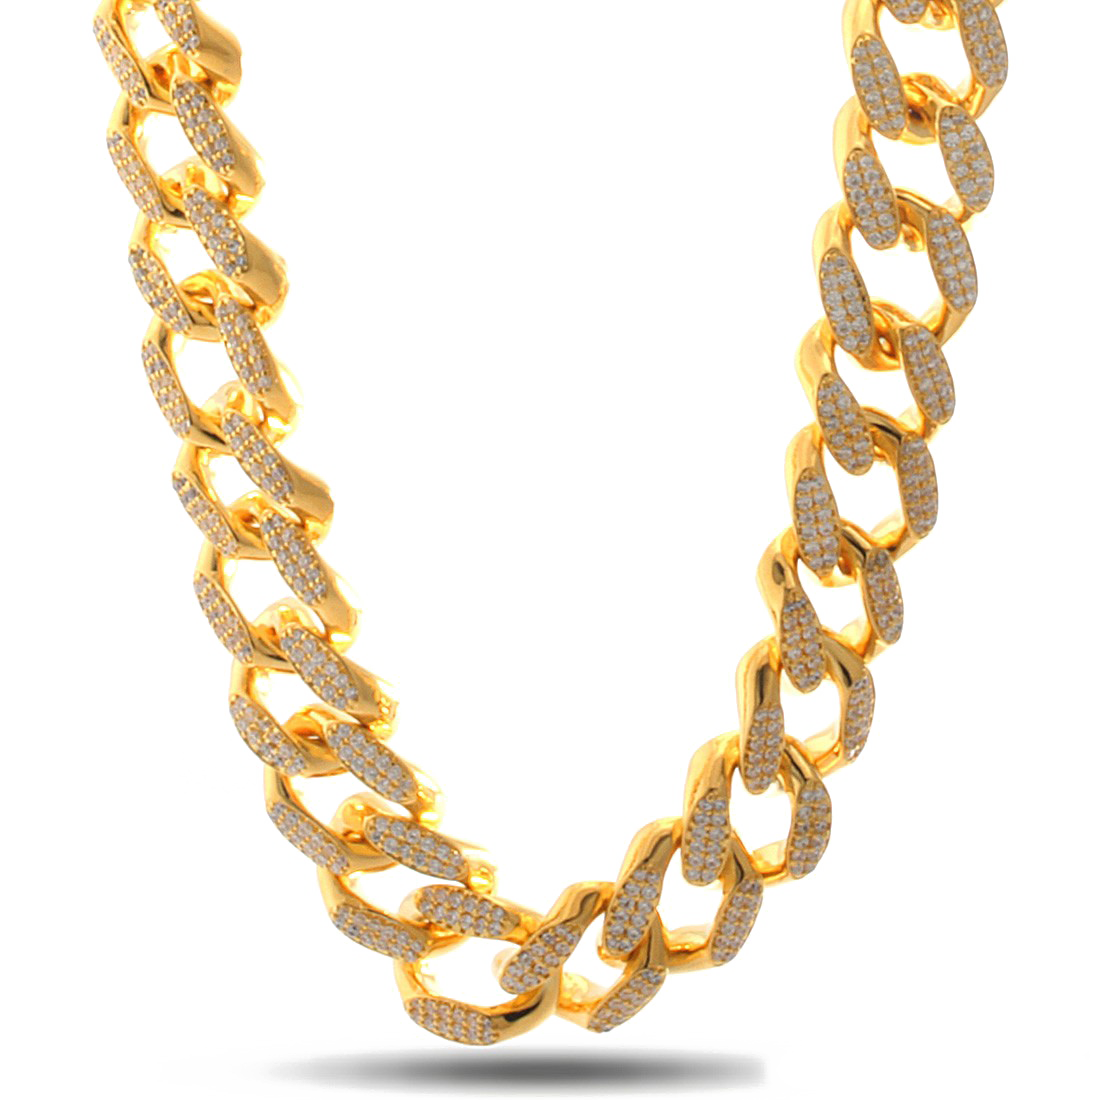 Thug Life Chain PNG Image Background